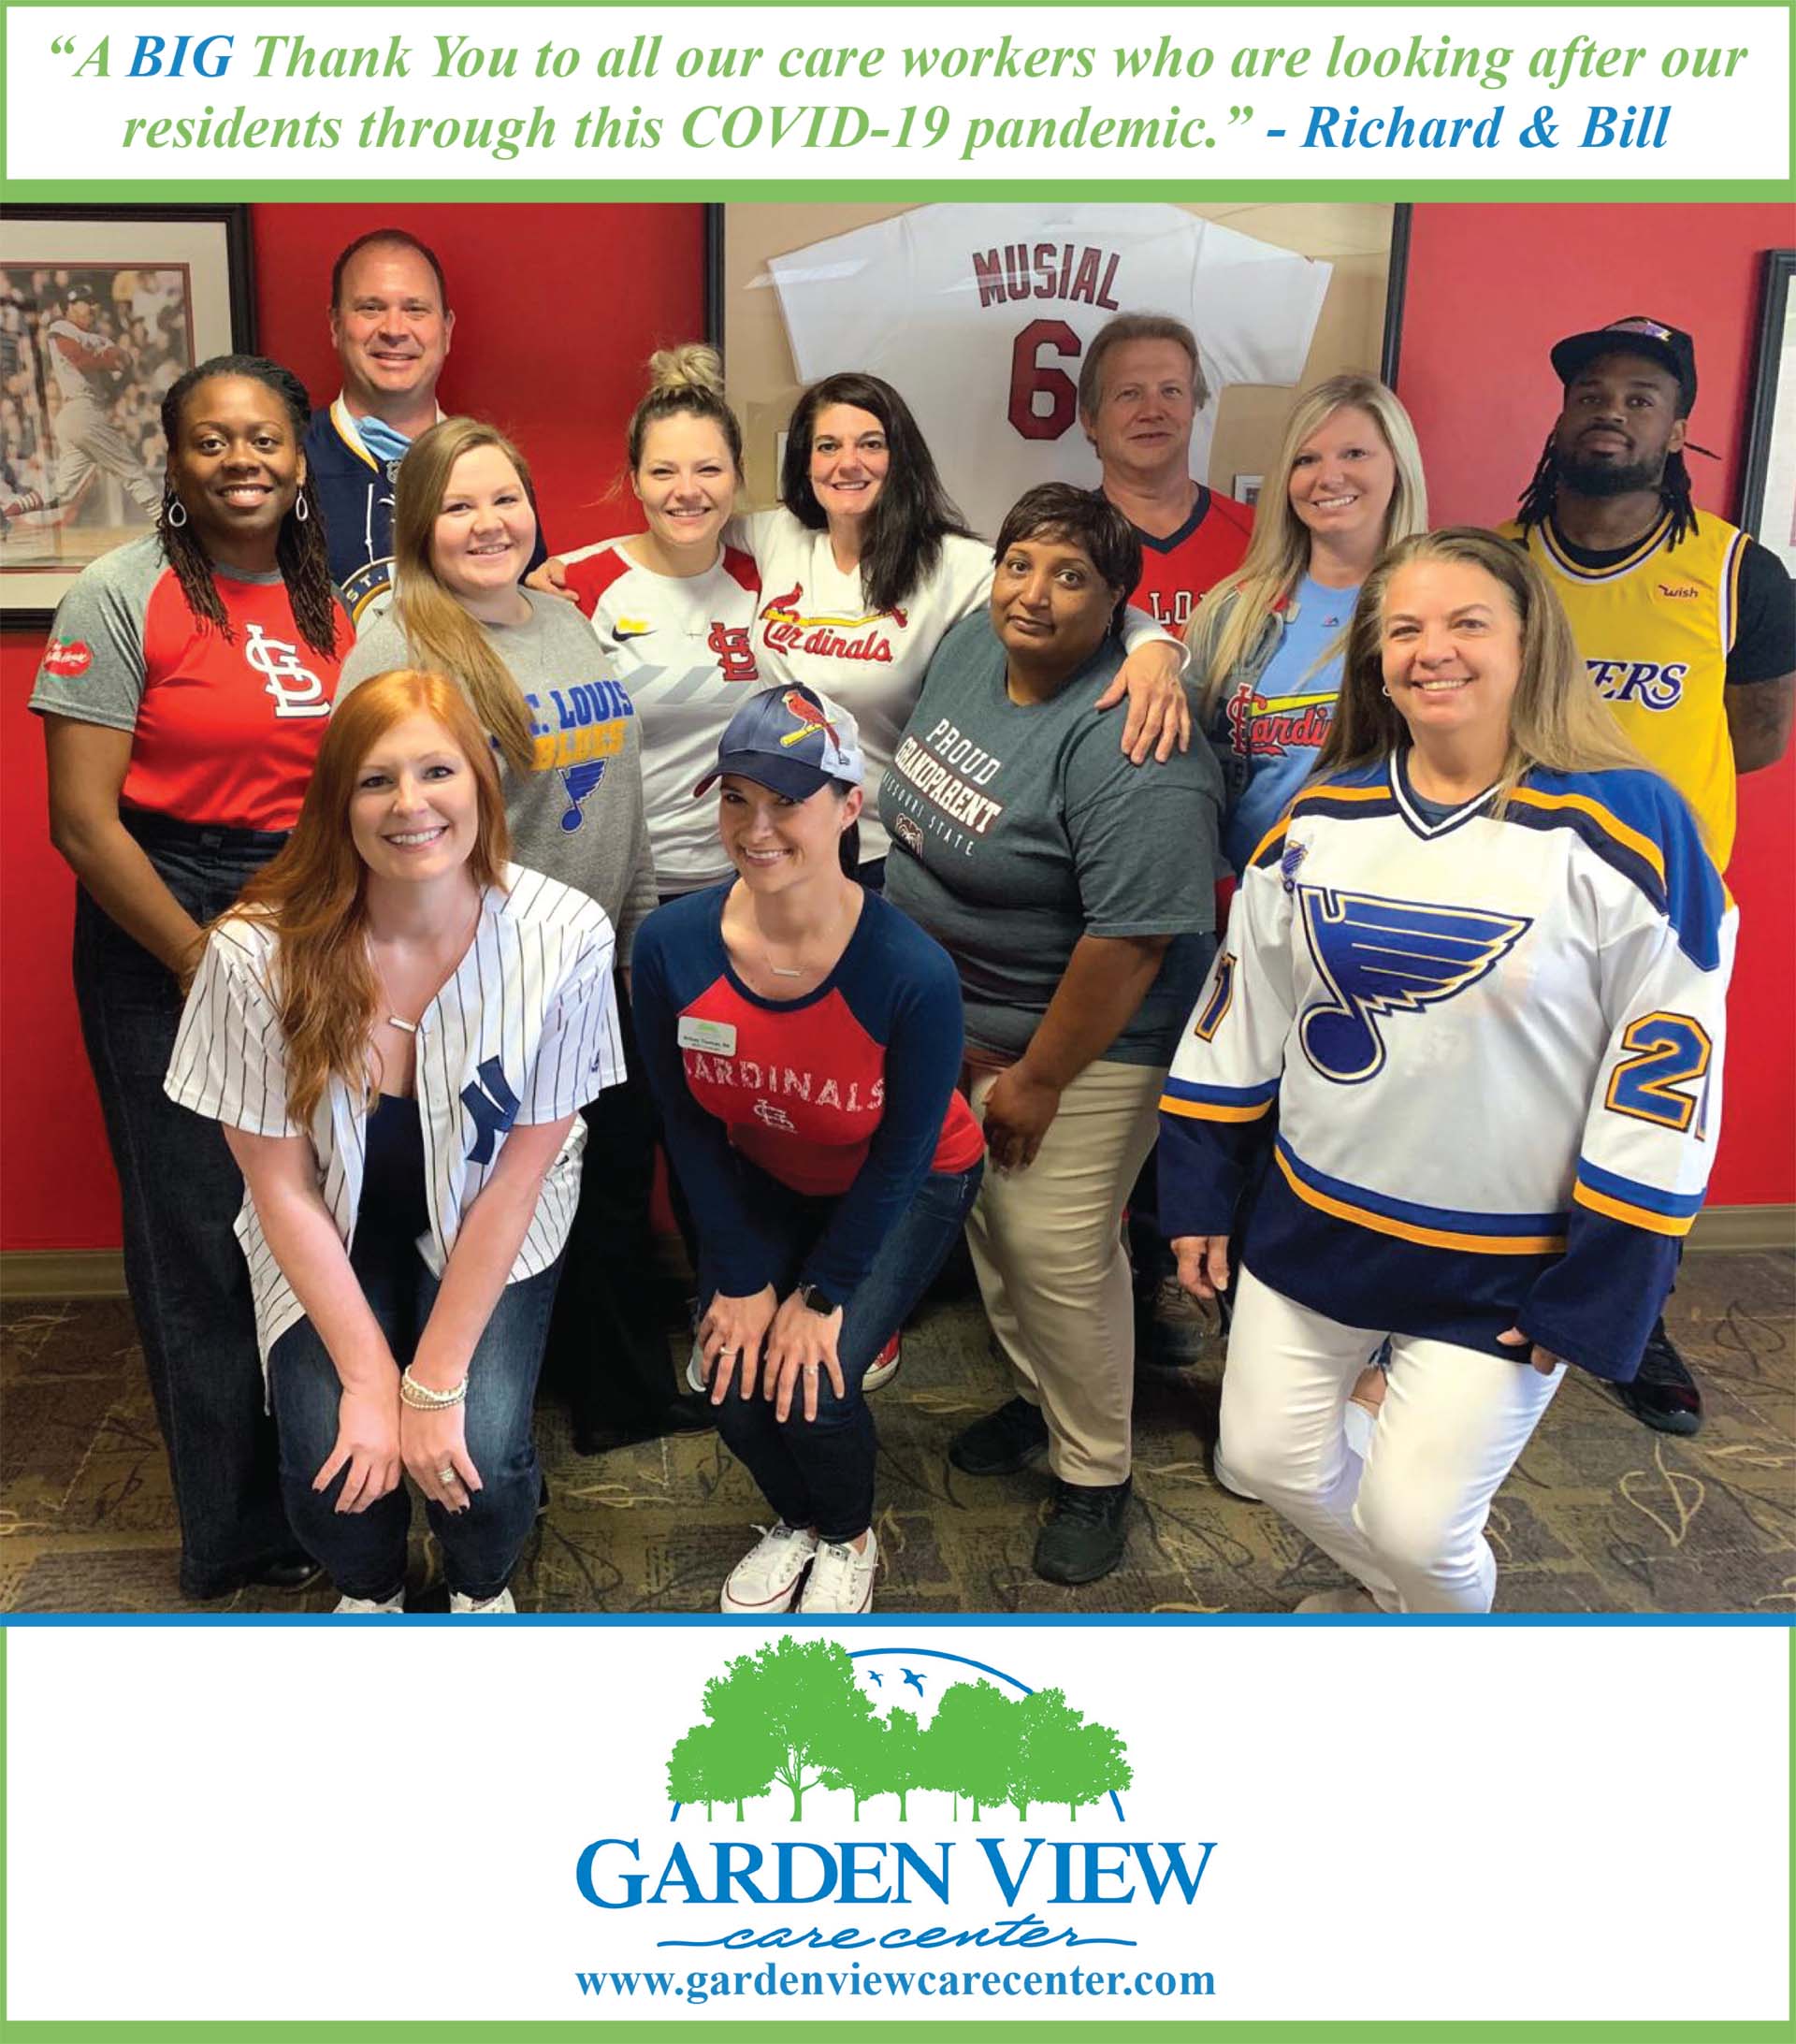 Owners Thank Garden View Care Center Staff - Garden View Care Center